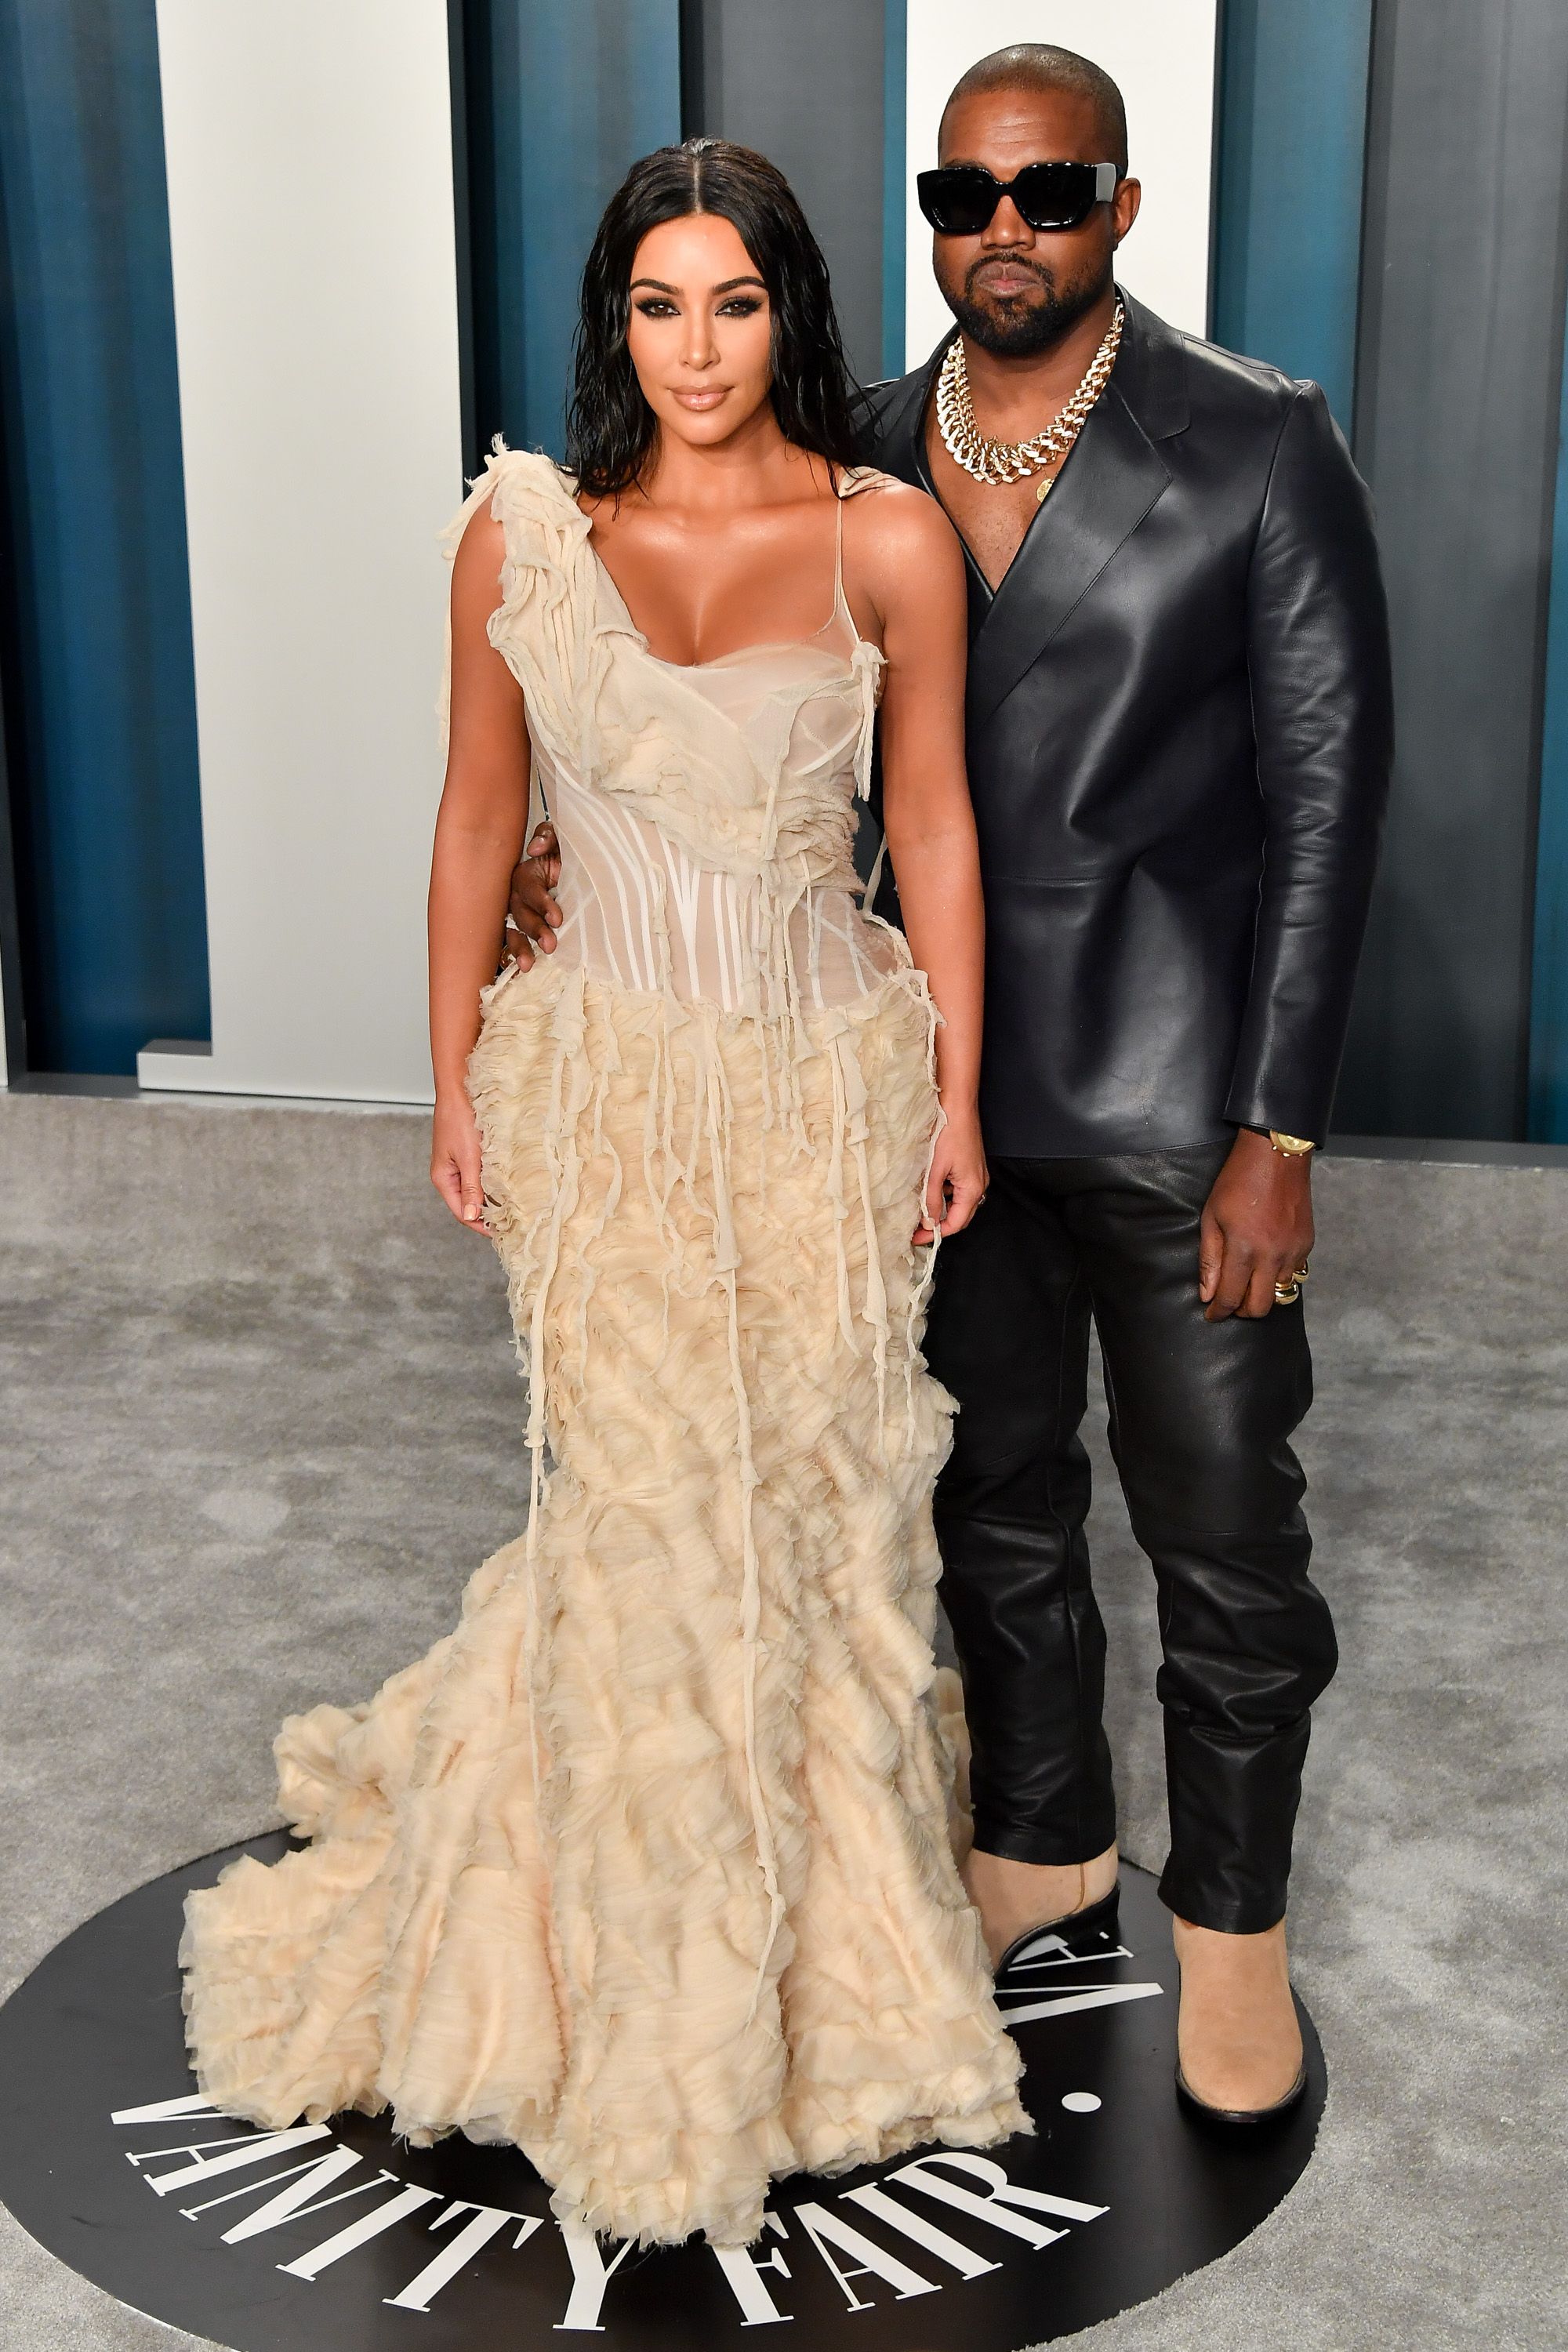 Kim Kardashian and Kanye West at the Vanity Fair Oscar Party hosted by Radhika Jones on February 09, 2020, in Beverly Hills, California. | Source: Getty Images